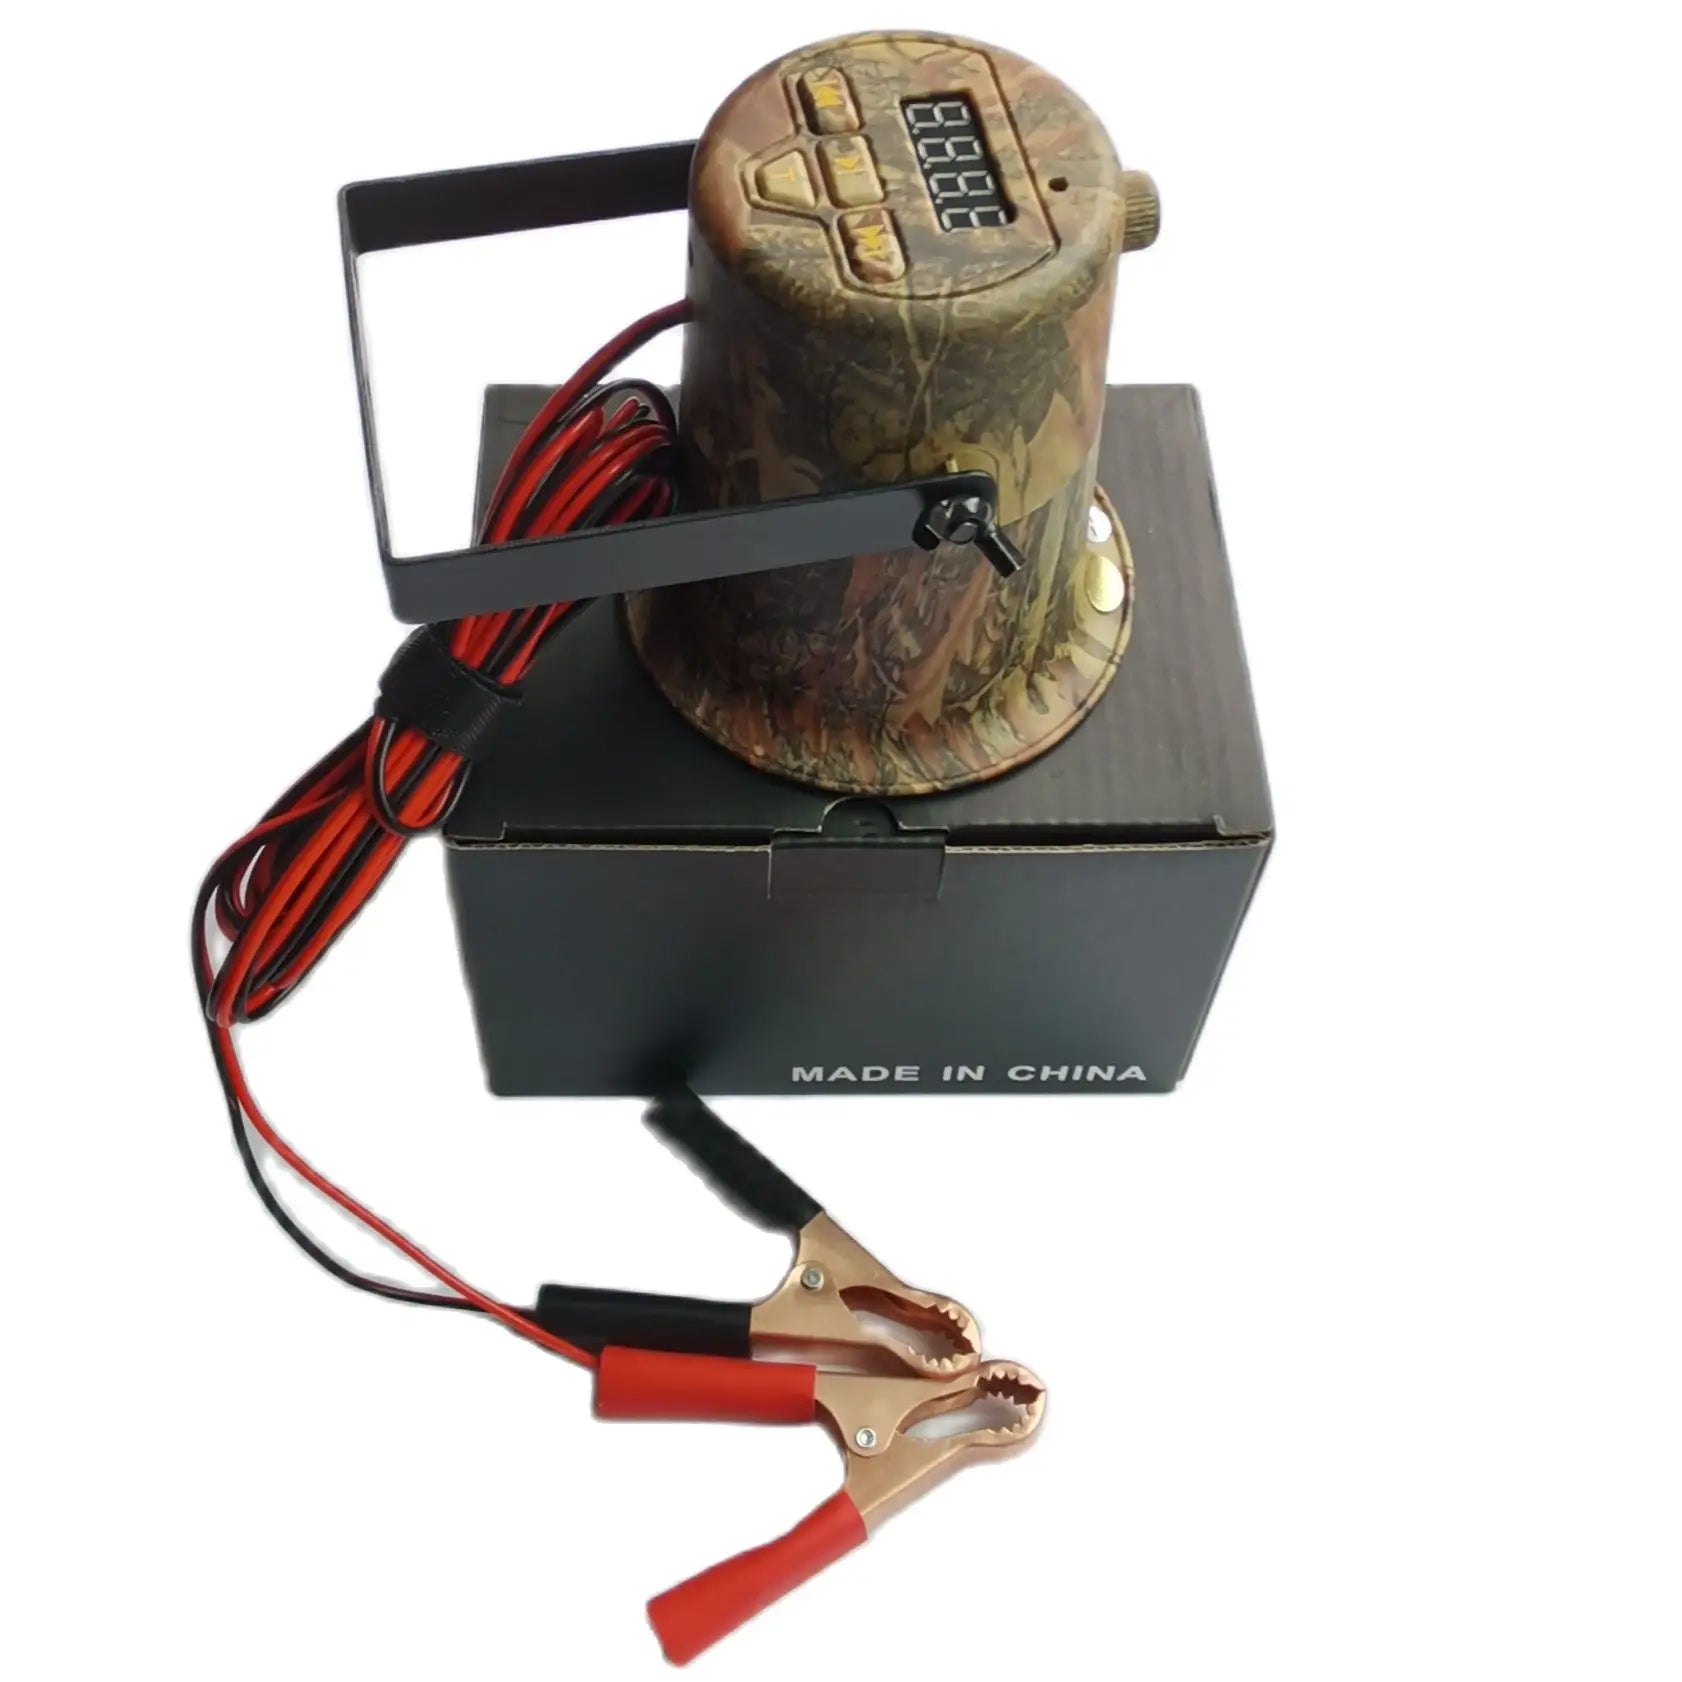 Digital Quail Sounds MP3 Device for Hunting